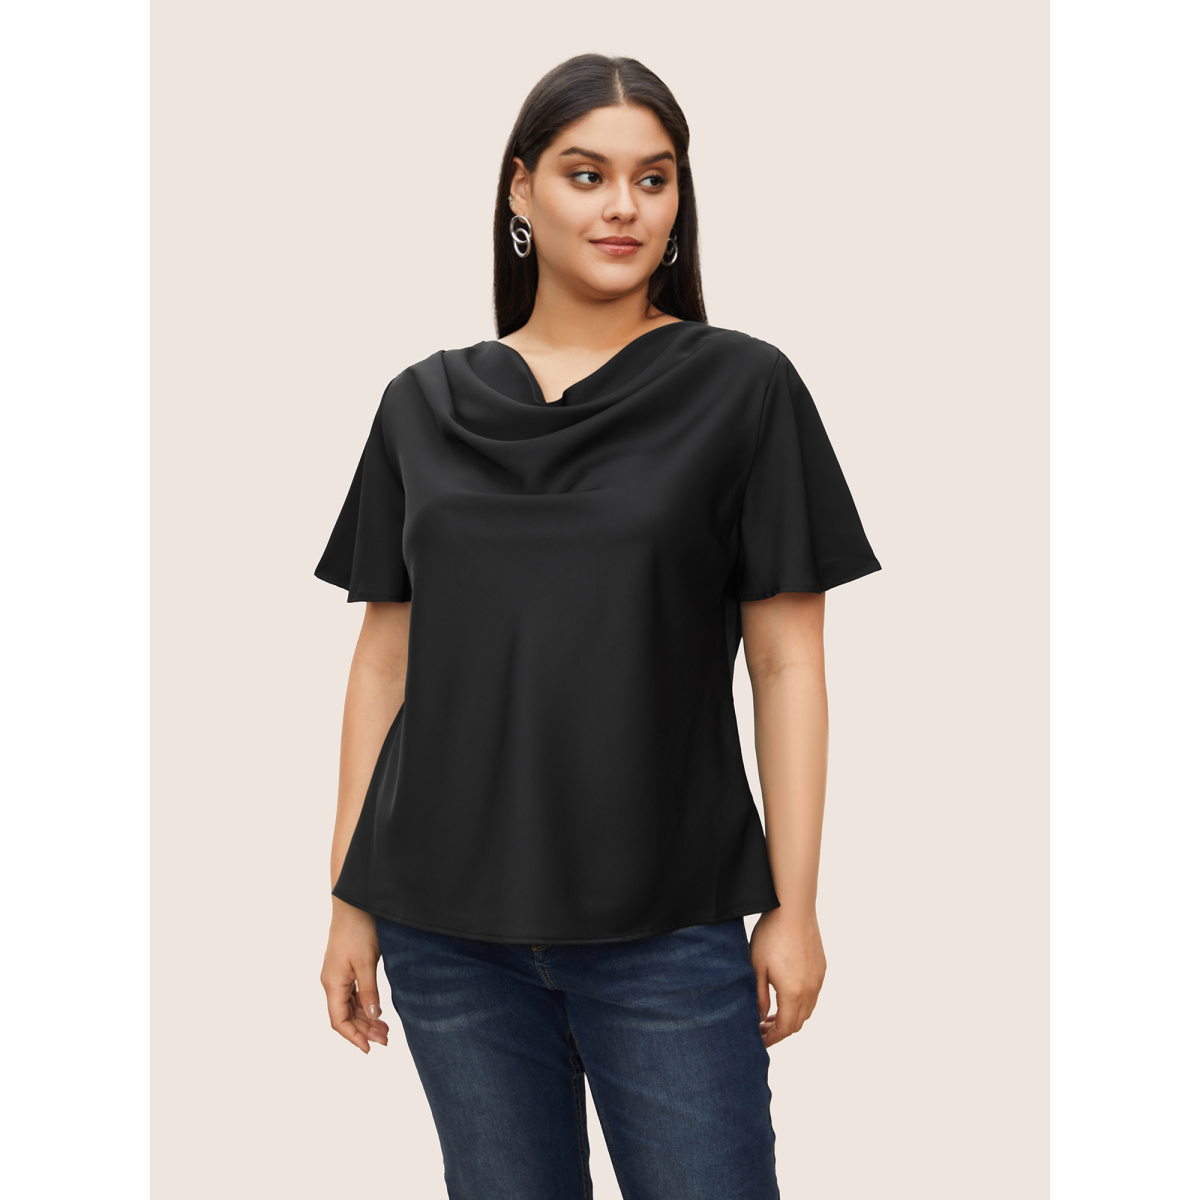 

Plus Size Black Plain Cowl Neck Ruffle Sleeve Blouse Women Work From Home Short sleeve Cowl Neck Work Blouses BloomChic